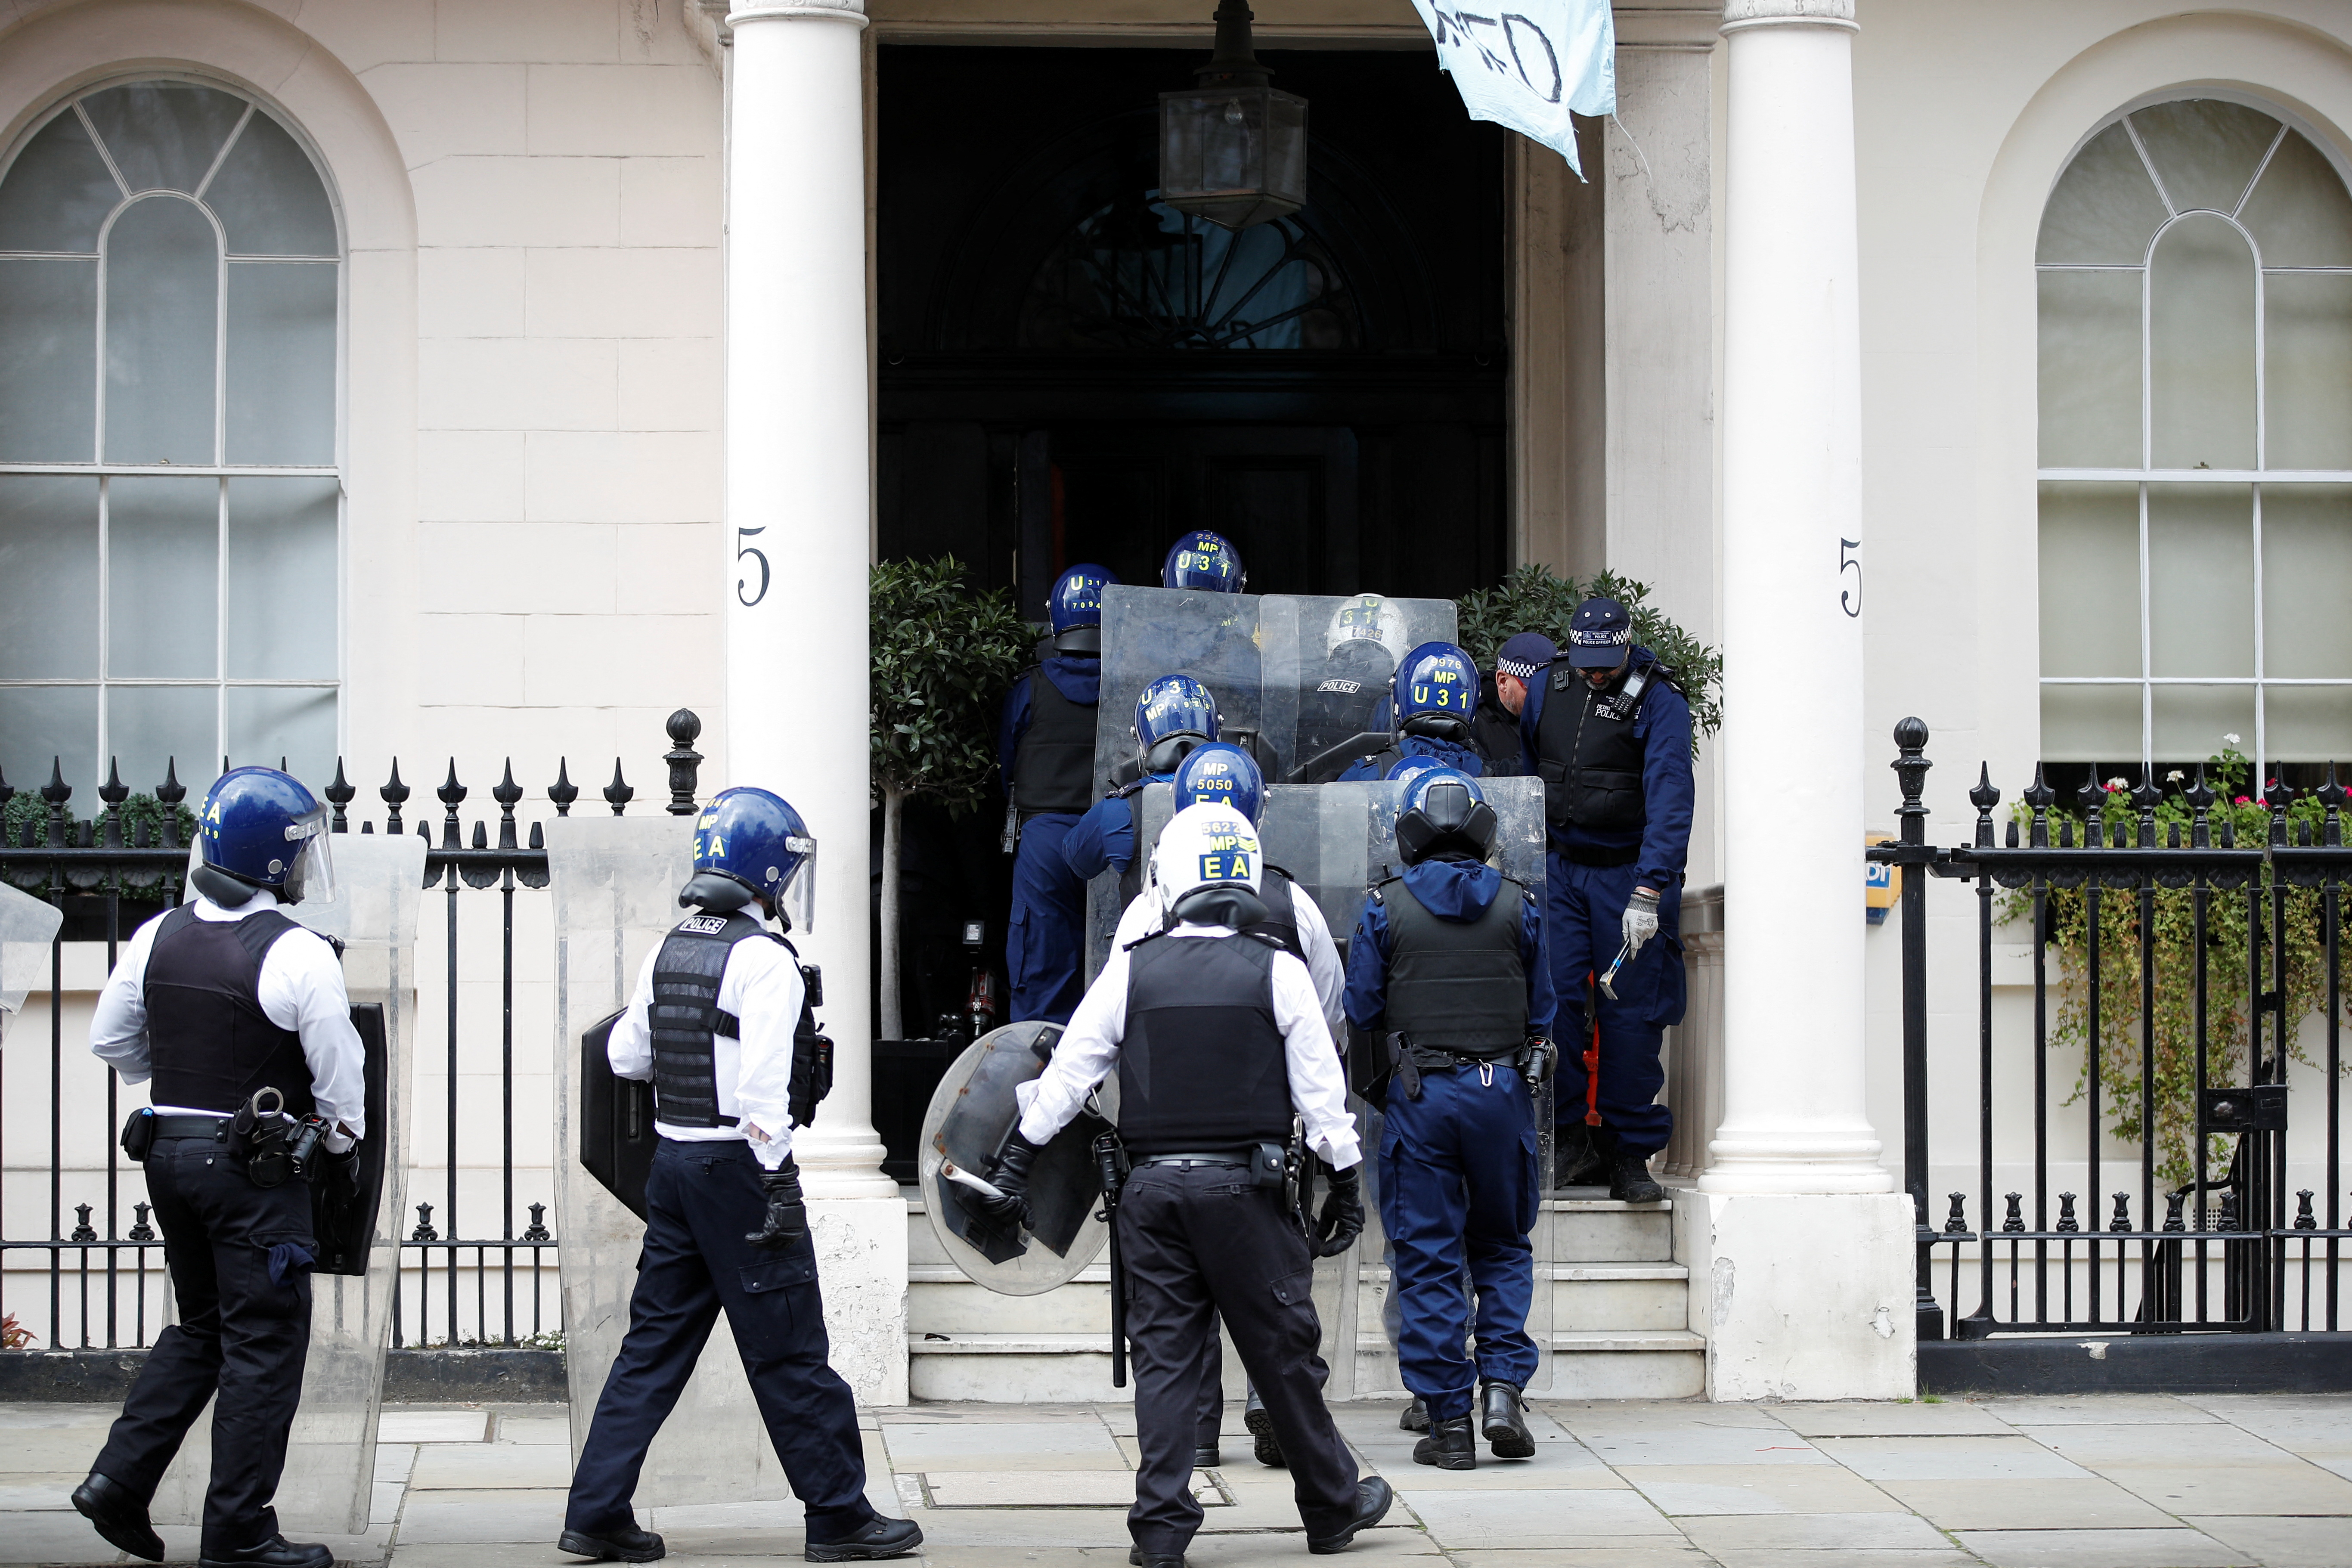 Squatters occupy mansion reportedly belonging to Russian oligarch, in London